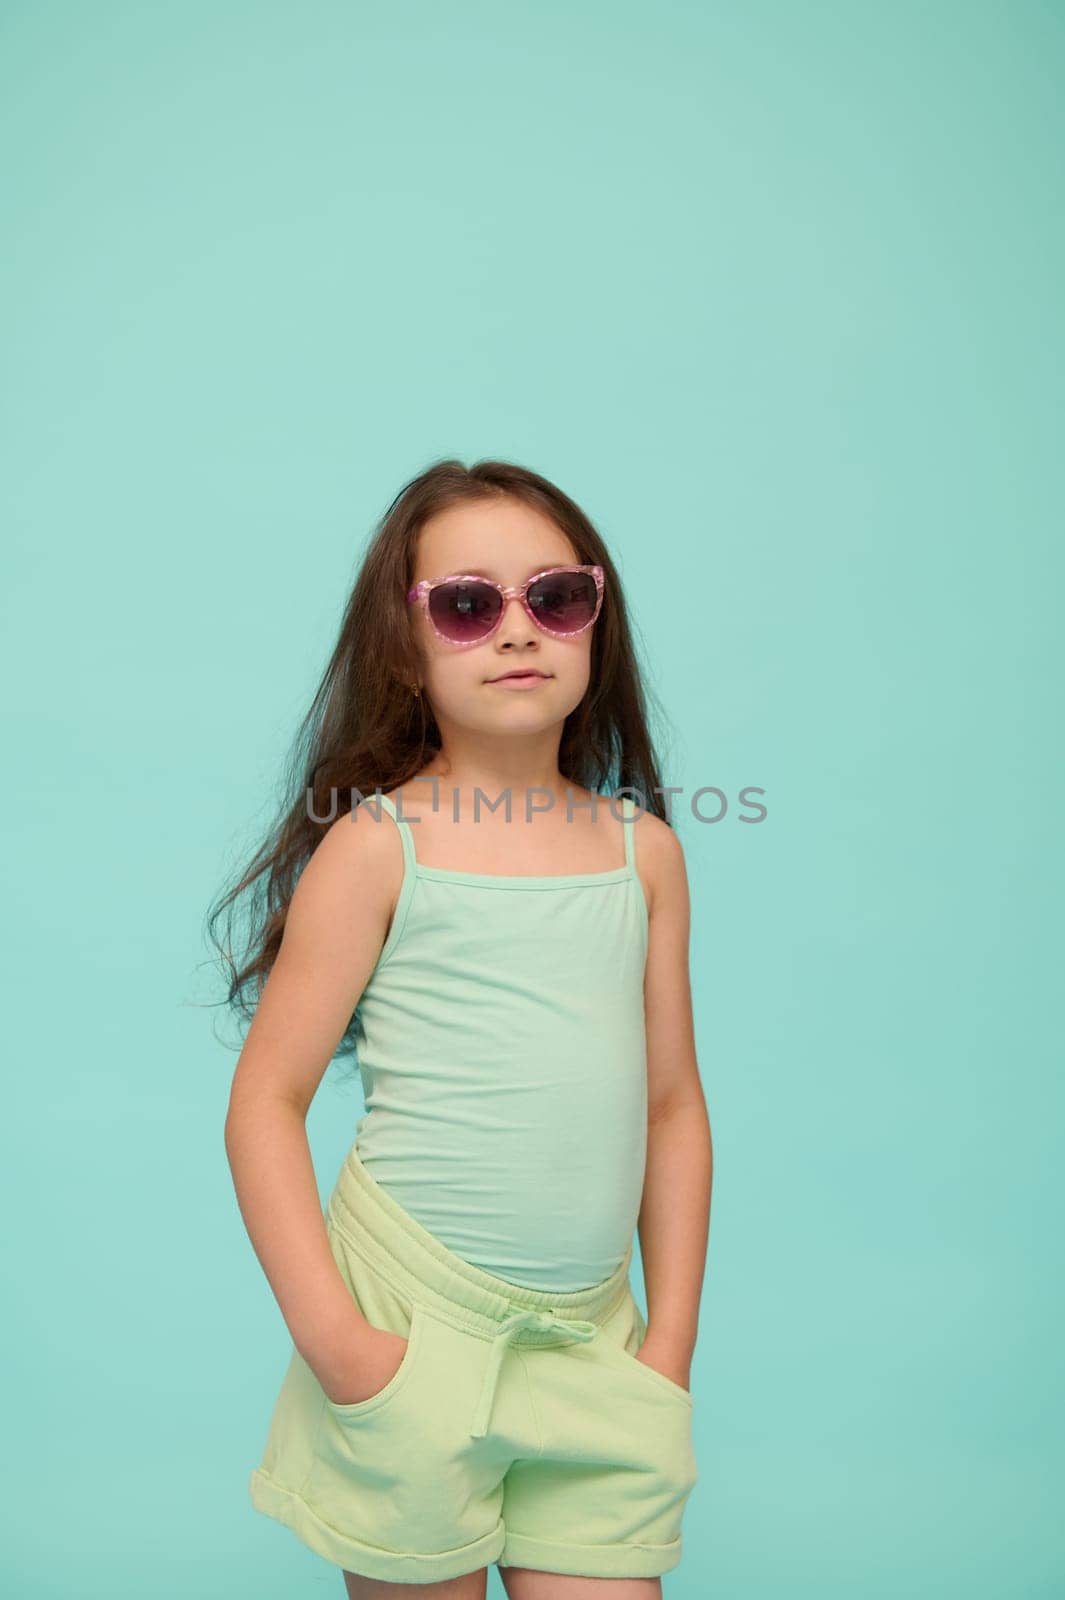 Adorable school age child girl in summer clothes and sunglasses, putting hands in pockets, confidently looking at camera, isolated on blue studio background with free advertising space for text